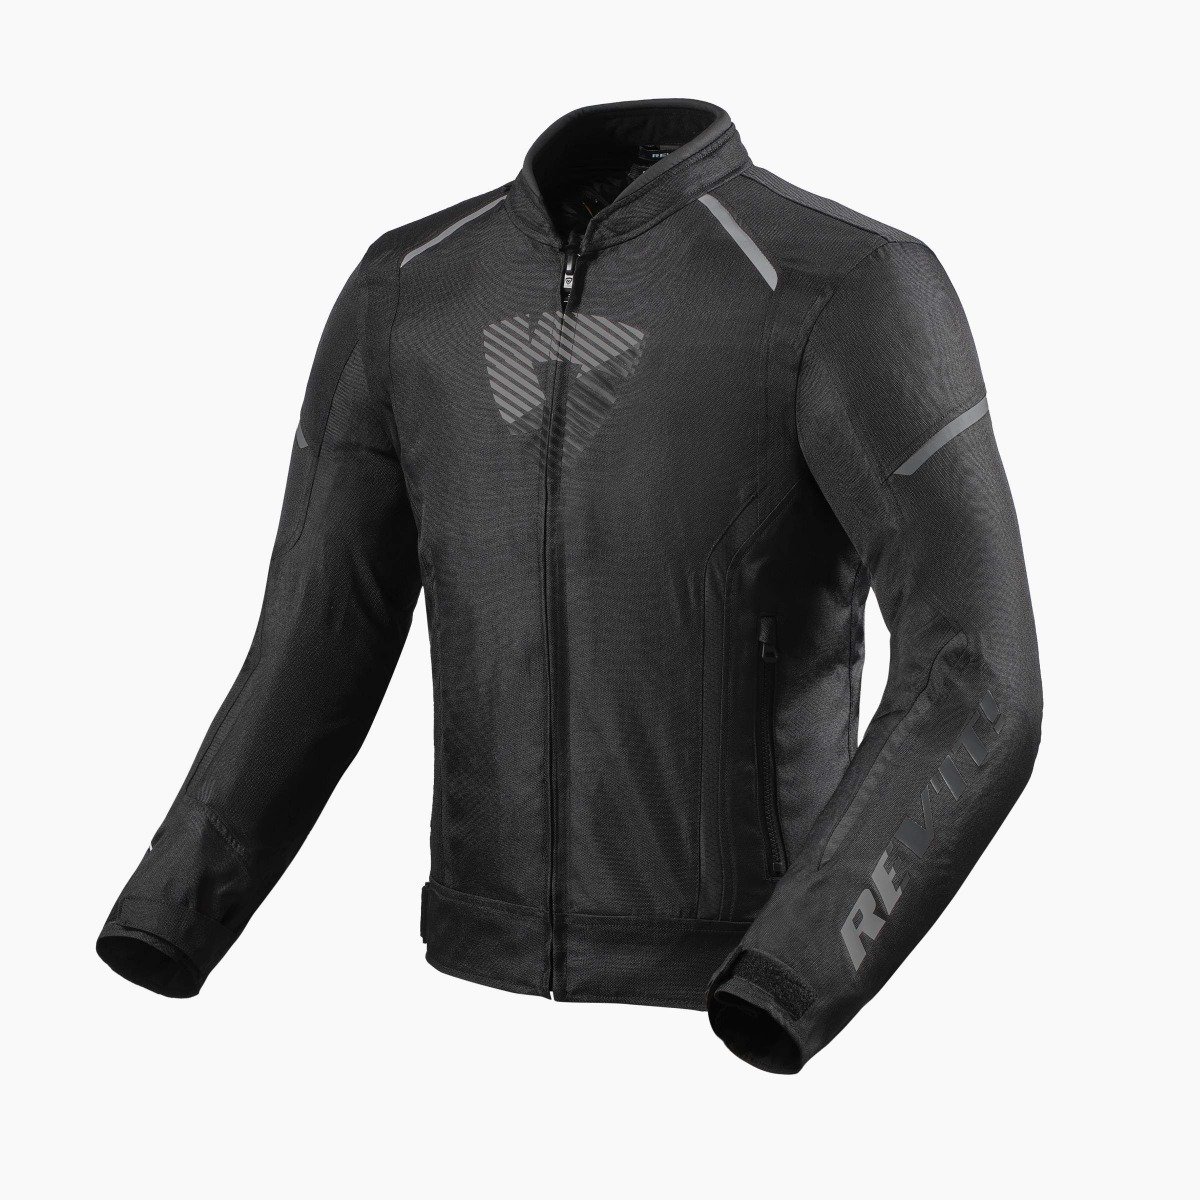 Image of REV'IT! Sprint H2O Jacket Black Anthracite Size S ID 8700001311731